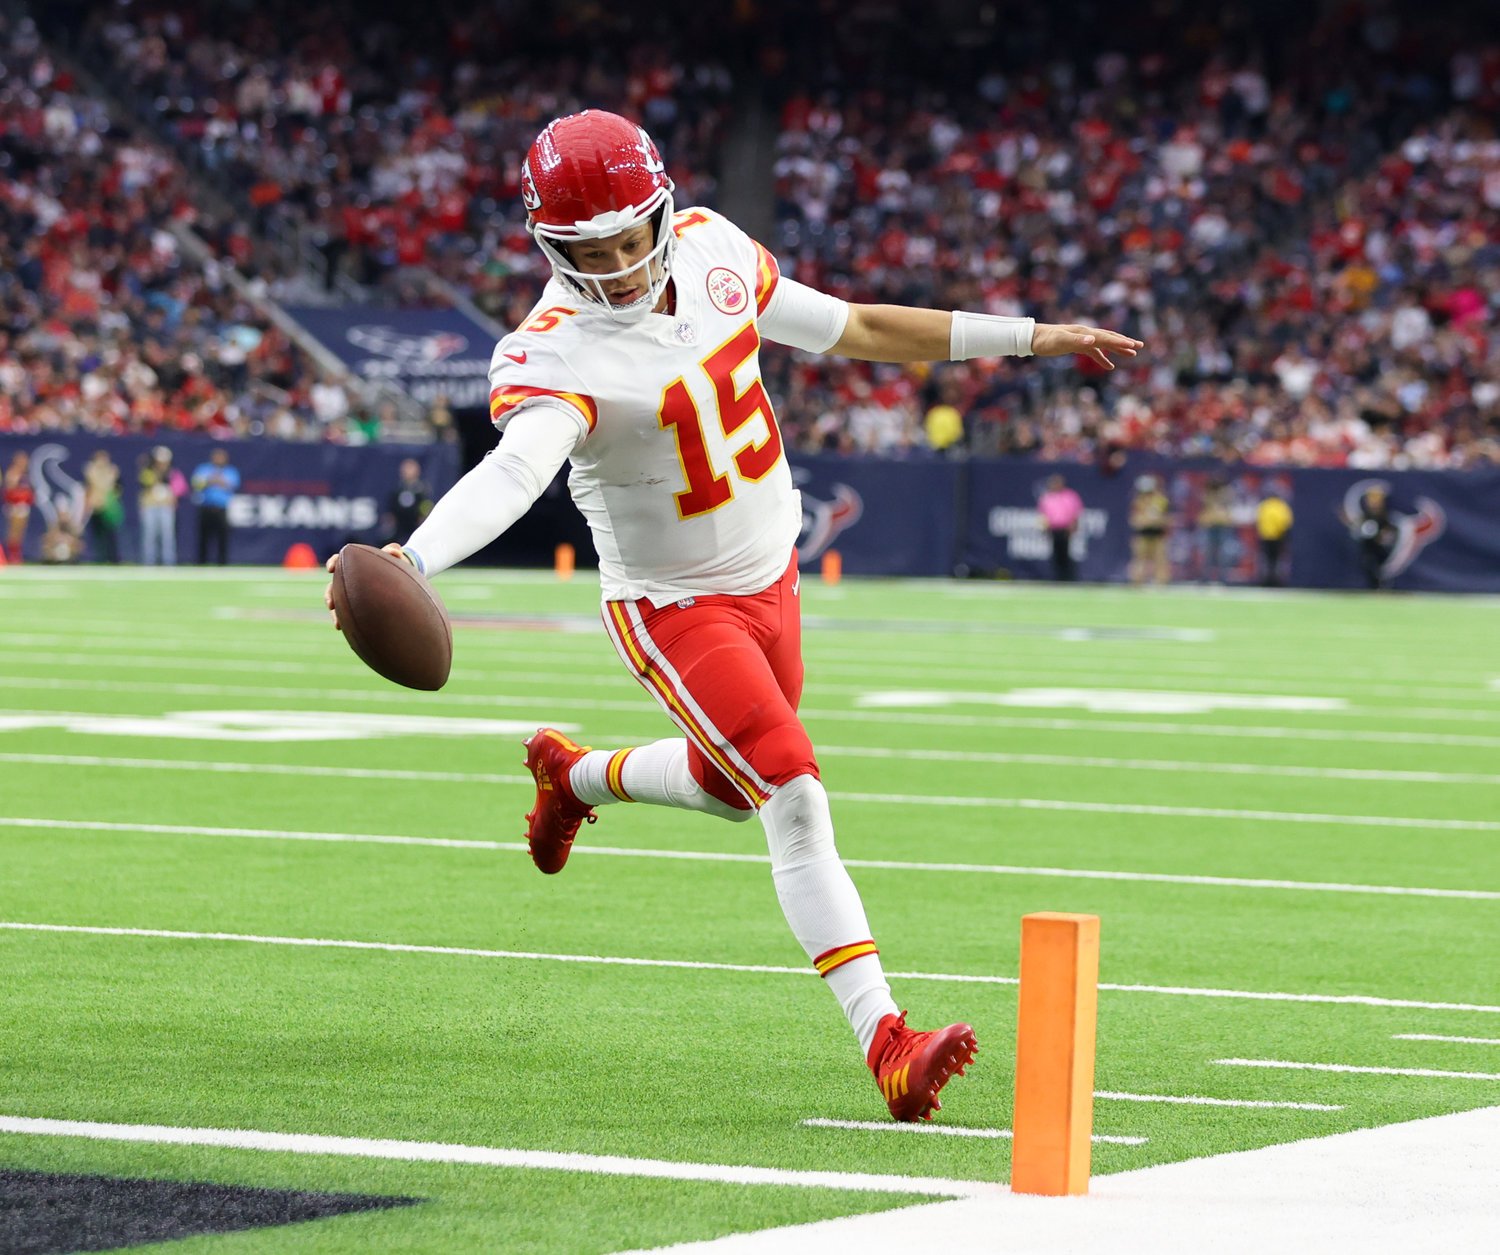 Kansas City Chiefs quarterback Patrick Mahomes (15) extends the ball across the goal line on a 5-yard touchdown carry during an NFL game between the Texans and the Chiefs on Dec. 18, 2022, in Houston. The Chiefs won, 30-24, in overtime.